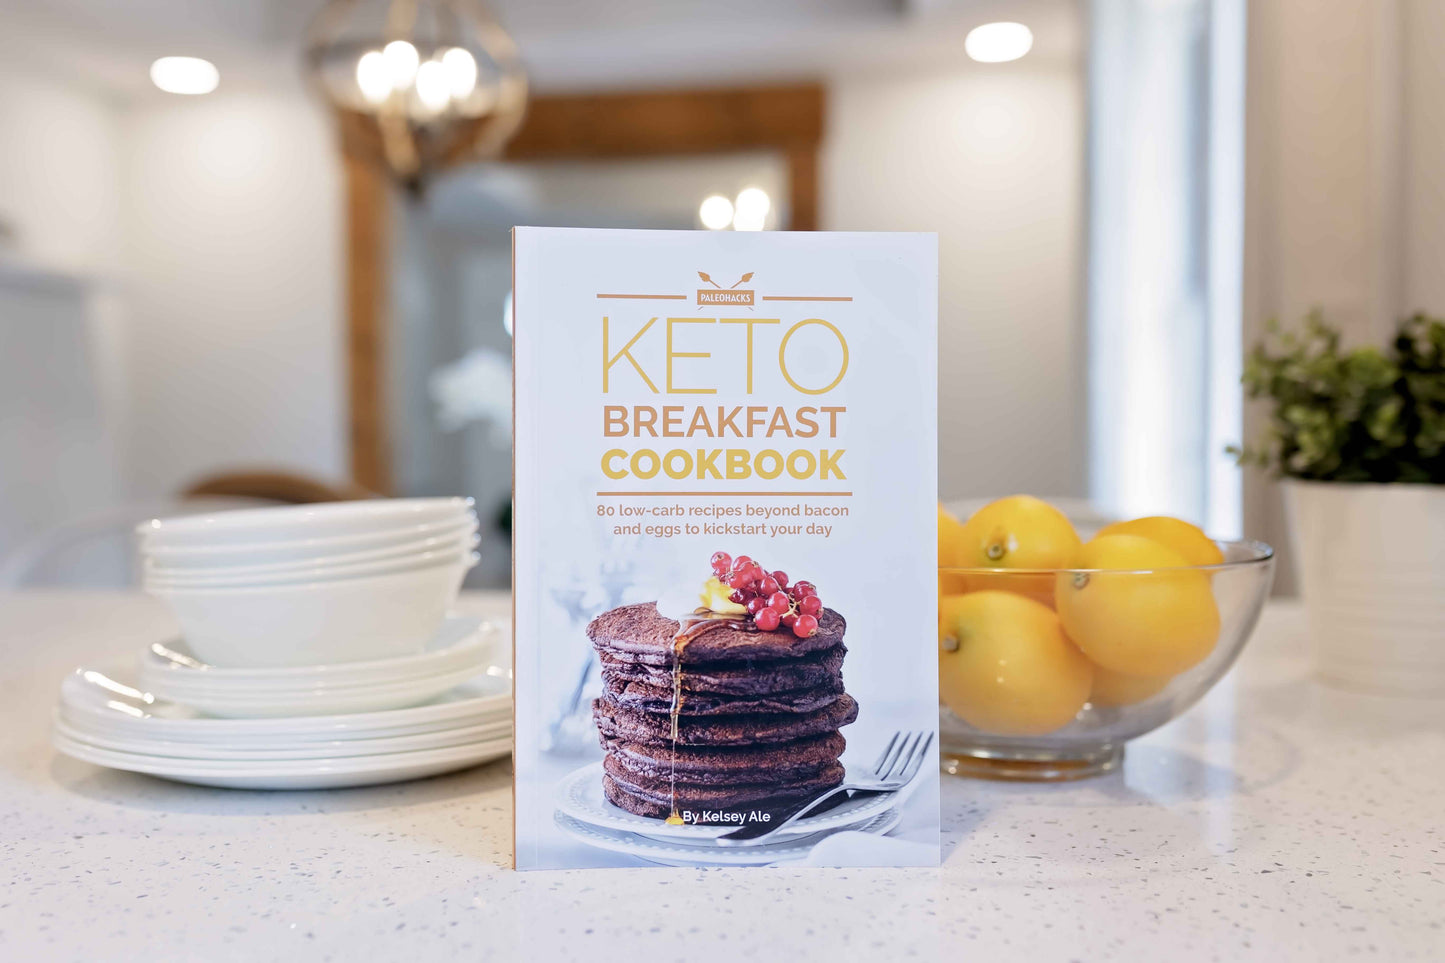 Keto breakfast cookbook is leaning against stacks of plates next to a bowl of lemons.